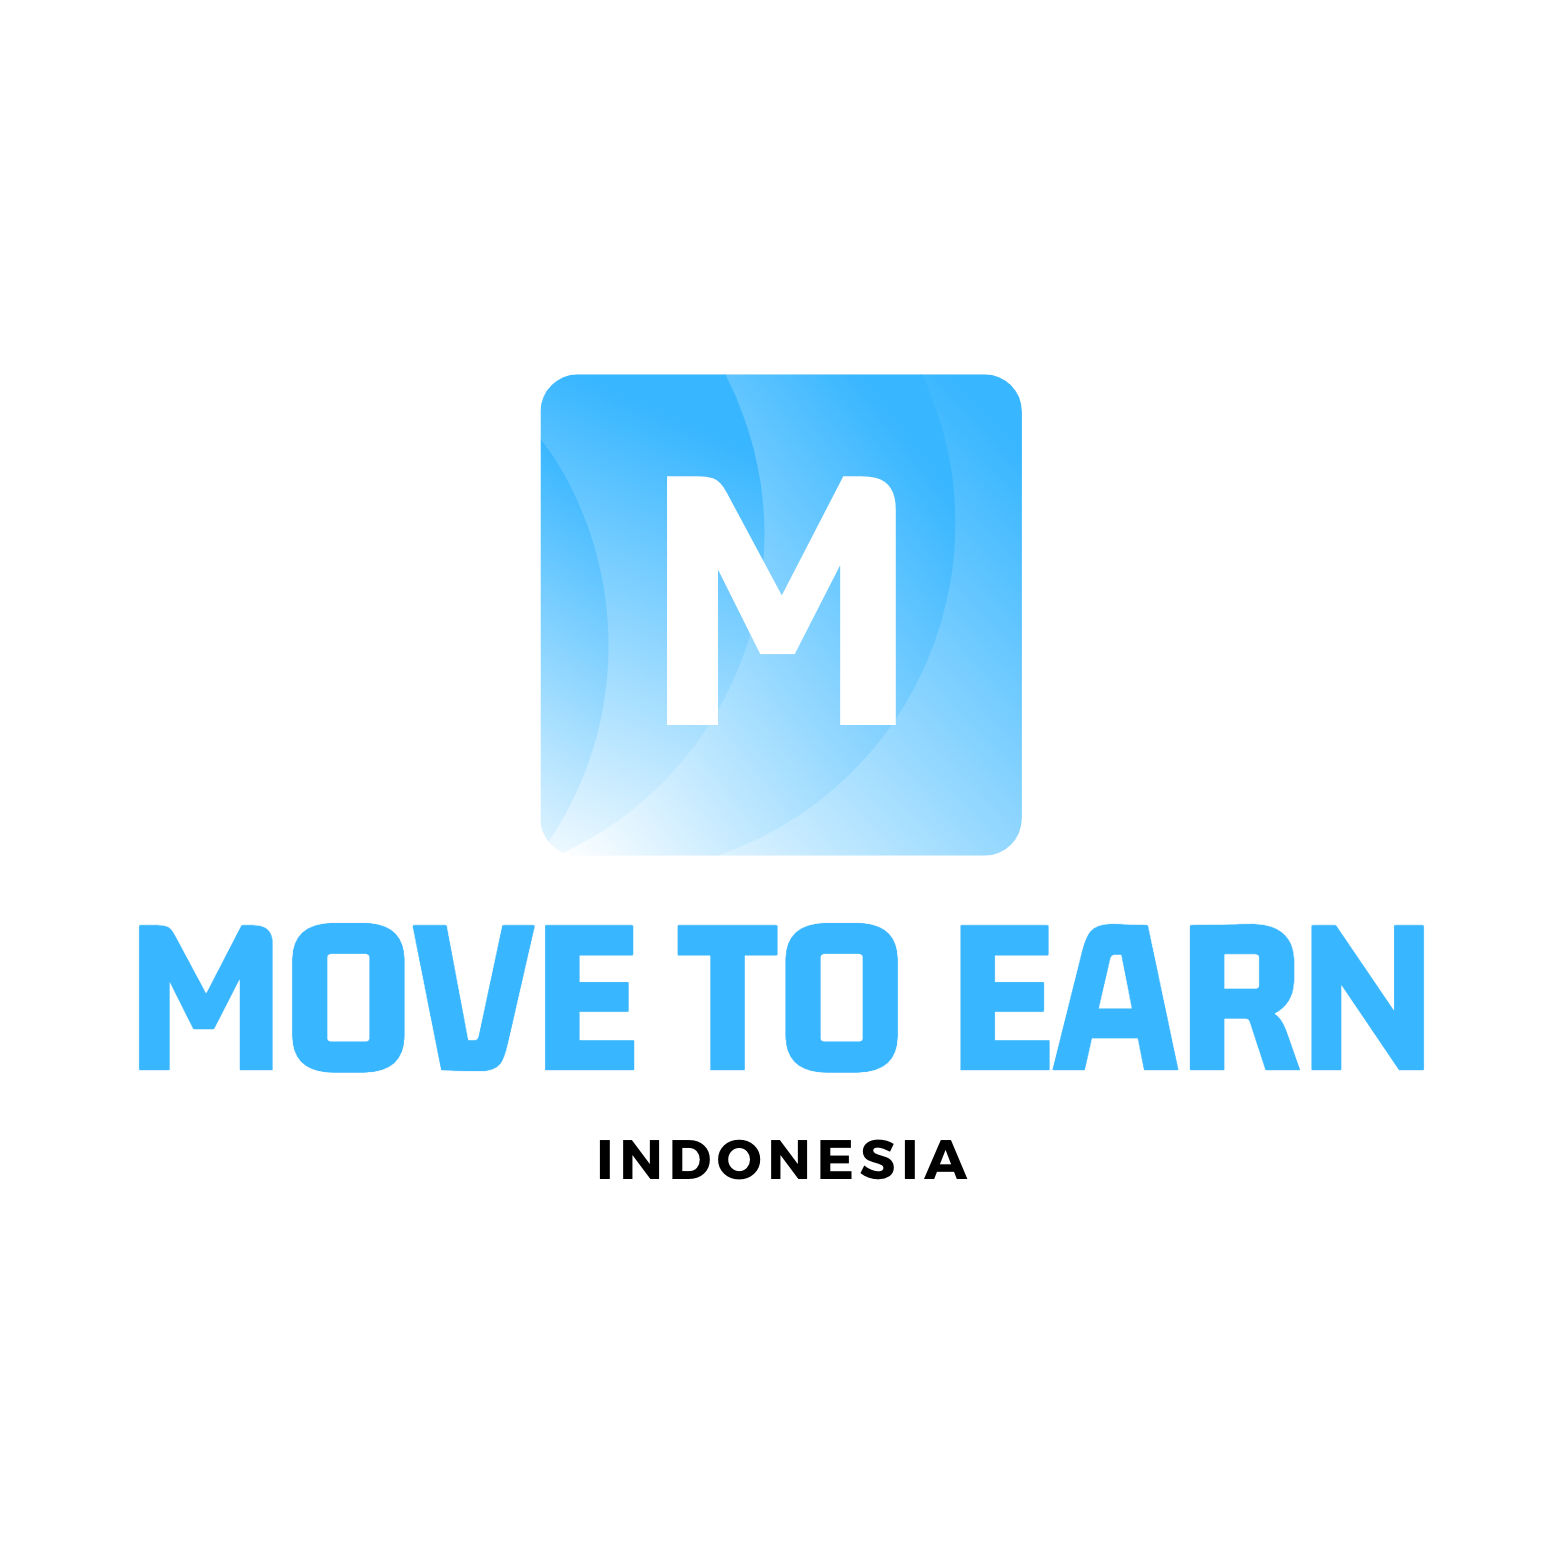 Logo Move to Earn Indonesia Center